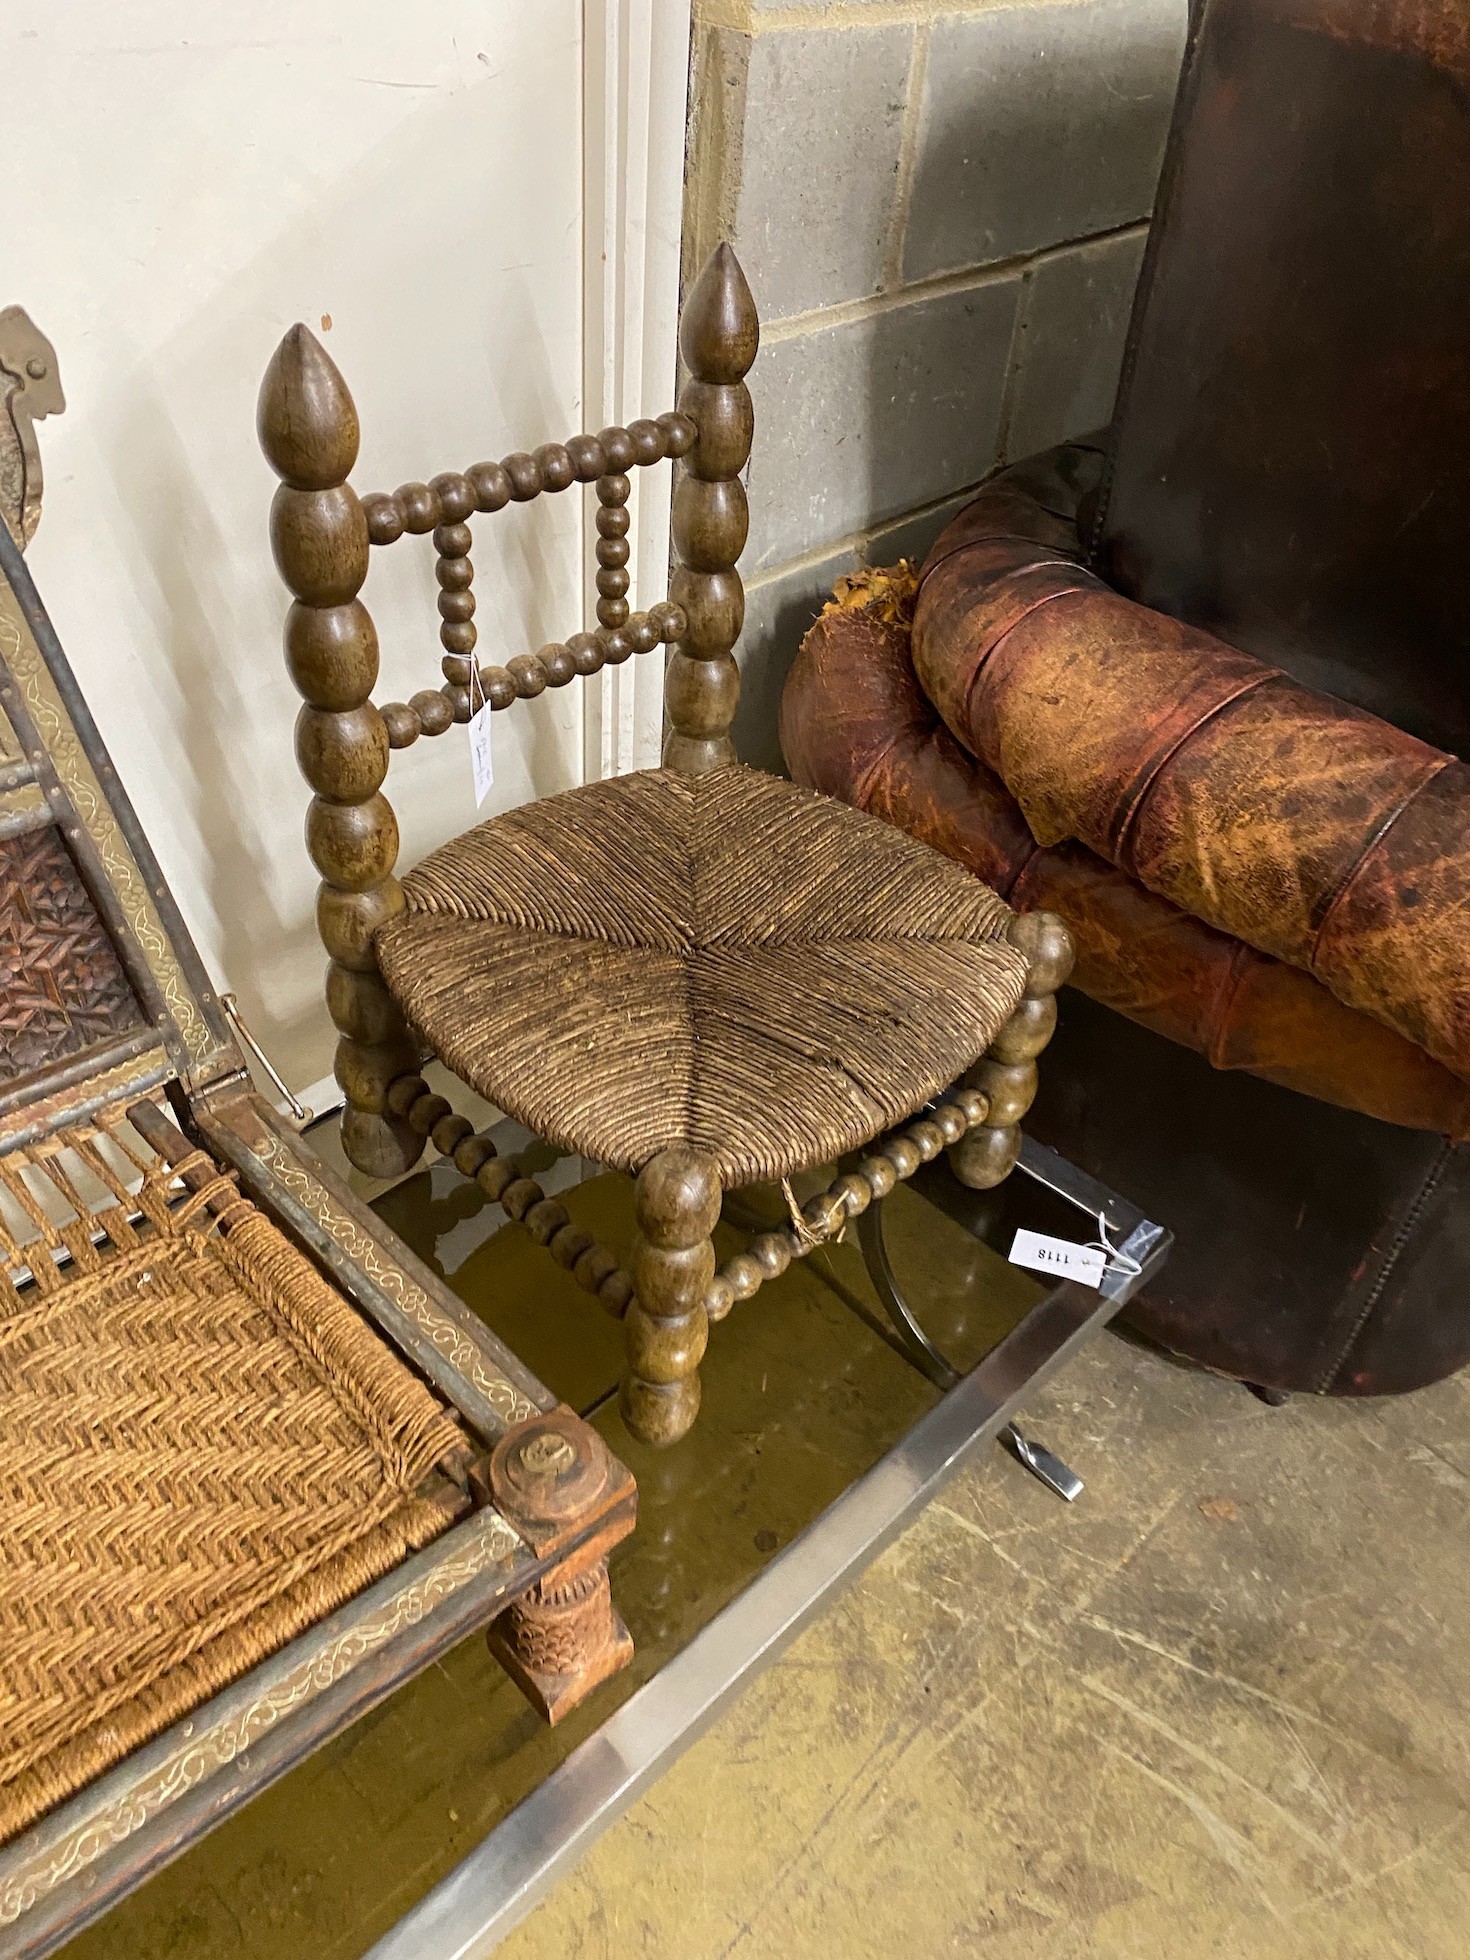 A bobbin chair and a Turkish carved hardwood low chair